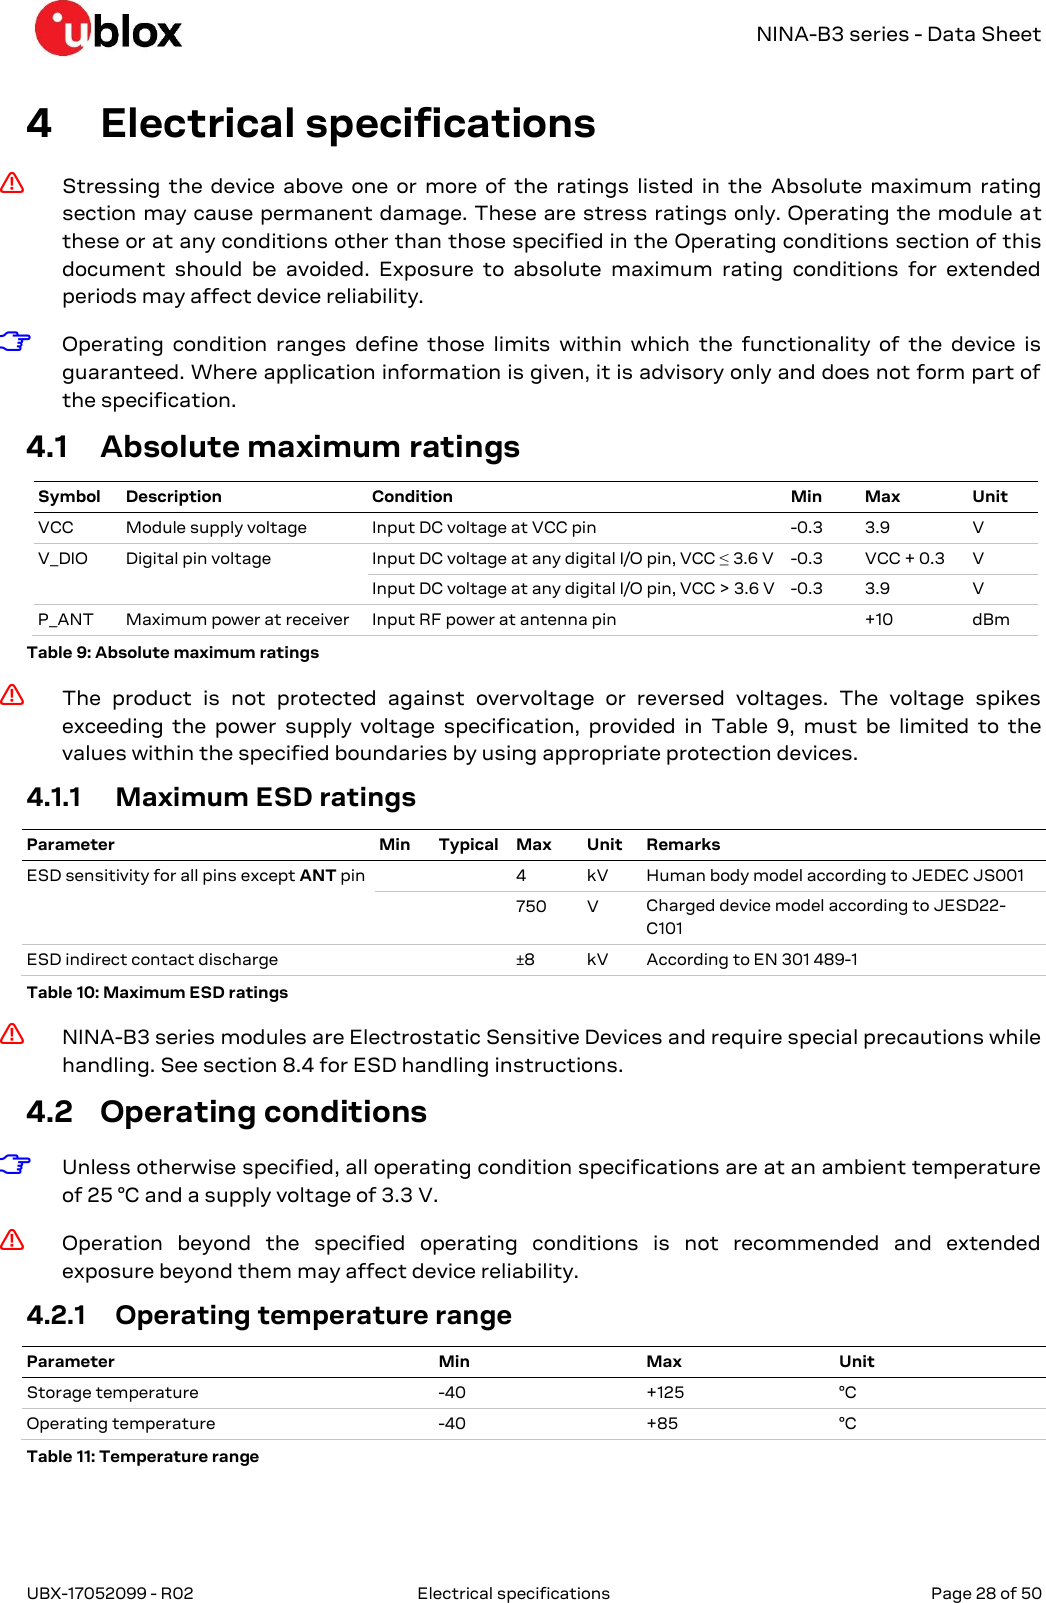   NINA-B3 series - Data Sheet UBX-17052099 - R02  Electrical specifications   Page 28 of 50      4 Electrical specifications ⚠ Stressing the  device above one  or more  of  the  ratings listed  in the  Absolute maximum rating section may cause permanent damage. These are stress ratings only. Operating the module at these or at any conditions other than those specified in the Operating conditions section of this document  should  be  avoided.  Exposure  to  absolute  maximum  rating  conditions  for  extended periods may affect device reliability. ☞ Operating  condition  ranges  define  those  limits  within  which  the  functionality  of  the  device  is guaranteed. Where application information is given, it is advisory only and does not form part of the specification. 4.1 Absolute maximum ratings Symbol Description Condition Min Max Unit VCC Module supply voltage Input DC voltage at VCC pin -0.3 3.9 V V_DIO Digital pin voltage Input DC voltage at any digital I/O pin, VCC ≤ 3.6 V -0.3 VCC + 0.3 V Input DC voltage at any digital I/O pin, VCC &gt; 3.6 V -0.3 3.9 V P_ANT Maximum power at receiver Input RF power at antenna pin  +10 dBm Table 9: Absolute maximum ratings ⚠ The  product  is  not  protected  against  overvoltage  or  reversed  voltages.  The  voltage  spikes exceeding  the  power  supply  voltage  specification,  provided  in  Table  9,  must  be  limited  to  the values within the specified boundaries by using appropriate protection devices. 4.1.1 Maximum ESD ratings Parameter Min Typical Max Unit Remarks ESD sensitivity for all pins except ANT pin   4 kV Human body model according to JEDEC JS001   750 V Charged device model according to JESD22-C101 ESD indirect contact discharge   ±8 kV According to EN 301 489-1 Table 10: Maximum ESD ratings ⚠ NINA-B3 series modules are Electrostatic Sensitive Devices and require special precautions while handling. See section 8.4 for ESD handling instructions. 4.2 Operating conditions ☞ Unless otherwise specified, all operating condition specifications are at an ambient temperature of 25 °C and a supply voltage of 3.3 V. ⚠ Operation  beyond  the  specified  operating  conditions  is  not  recommended  and  extended exposure beyond them may affect device reliability. 4.2.1 Operating temperature range Parameter Min Max Unit Storage temperature -40 +125 °C Operating temperature -40 +85 °C Table 11: Temperature range 